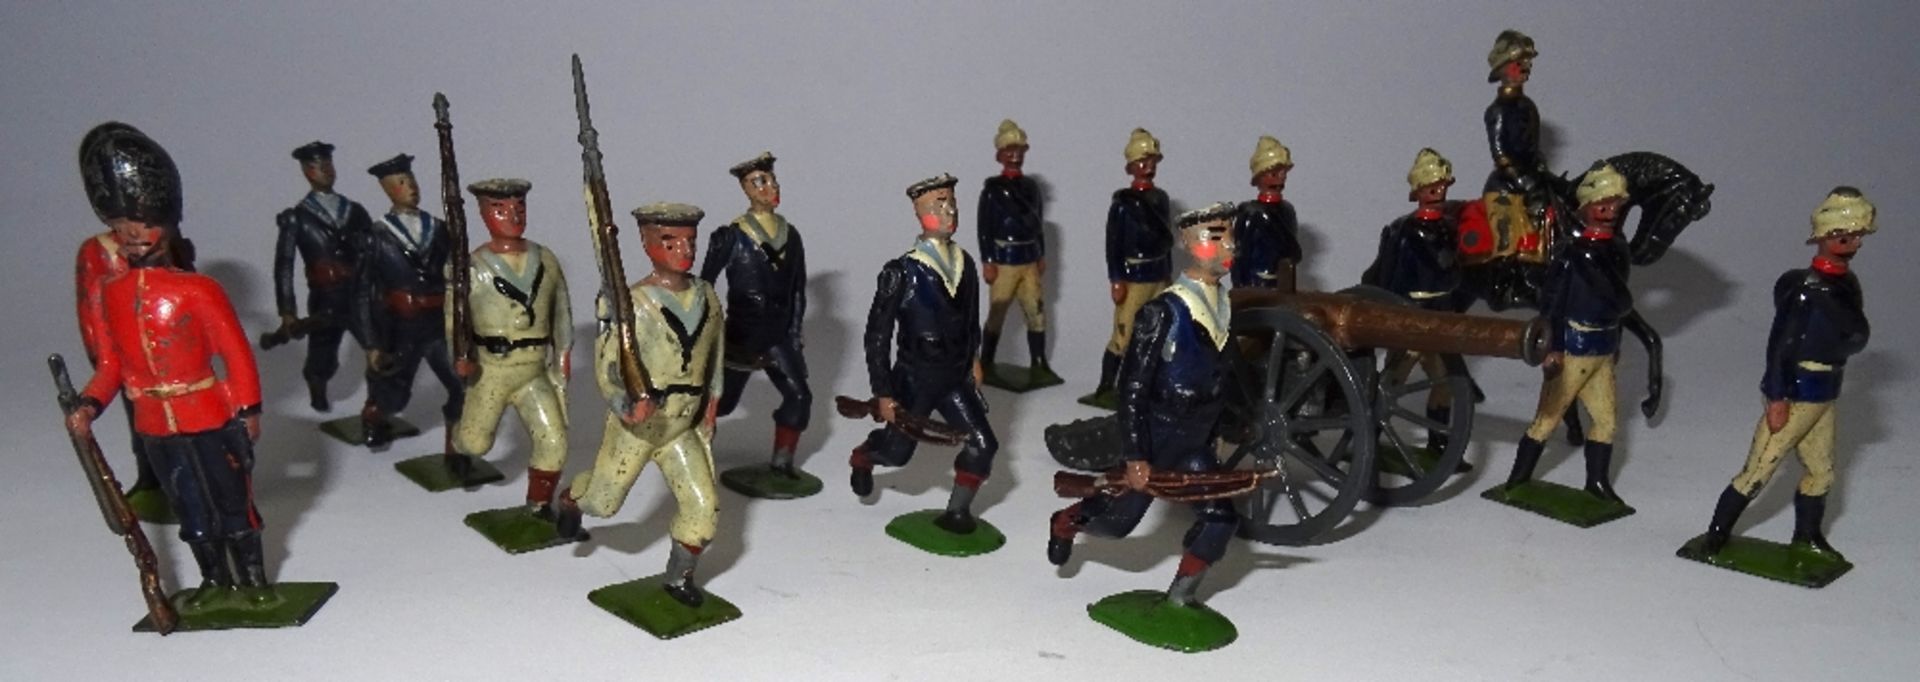 Britains various early figures - Image 2 of 3